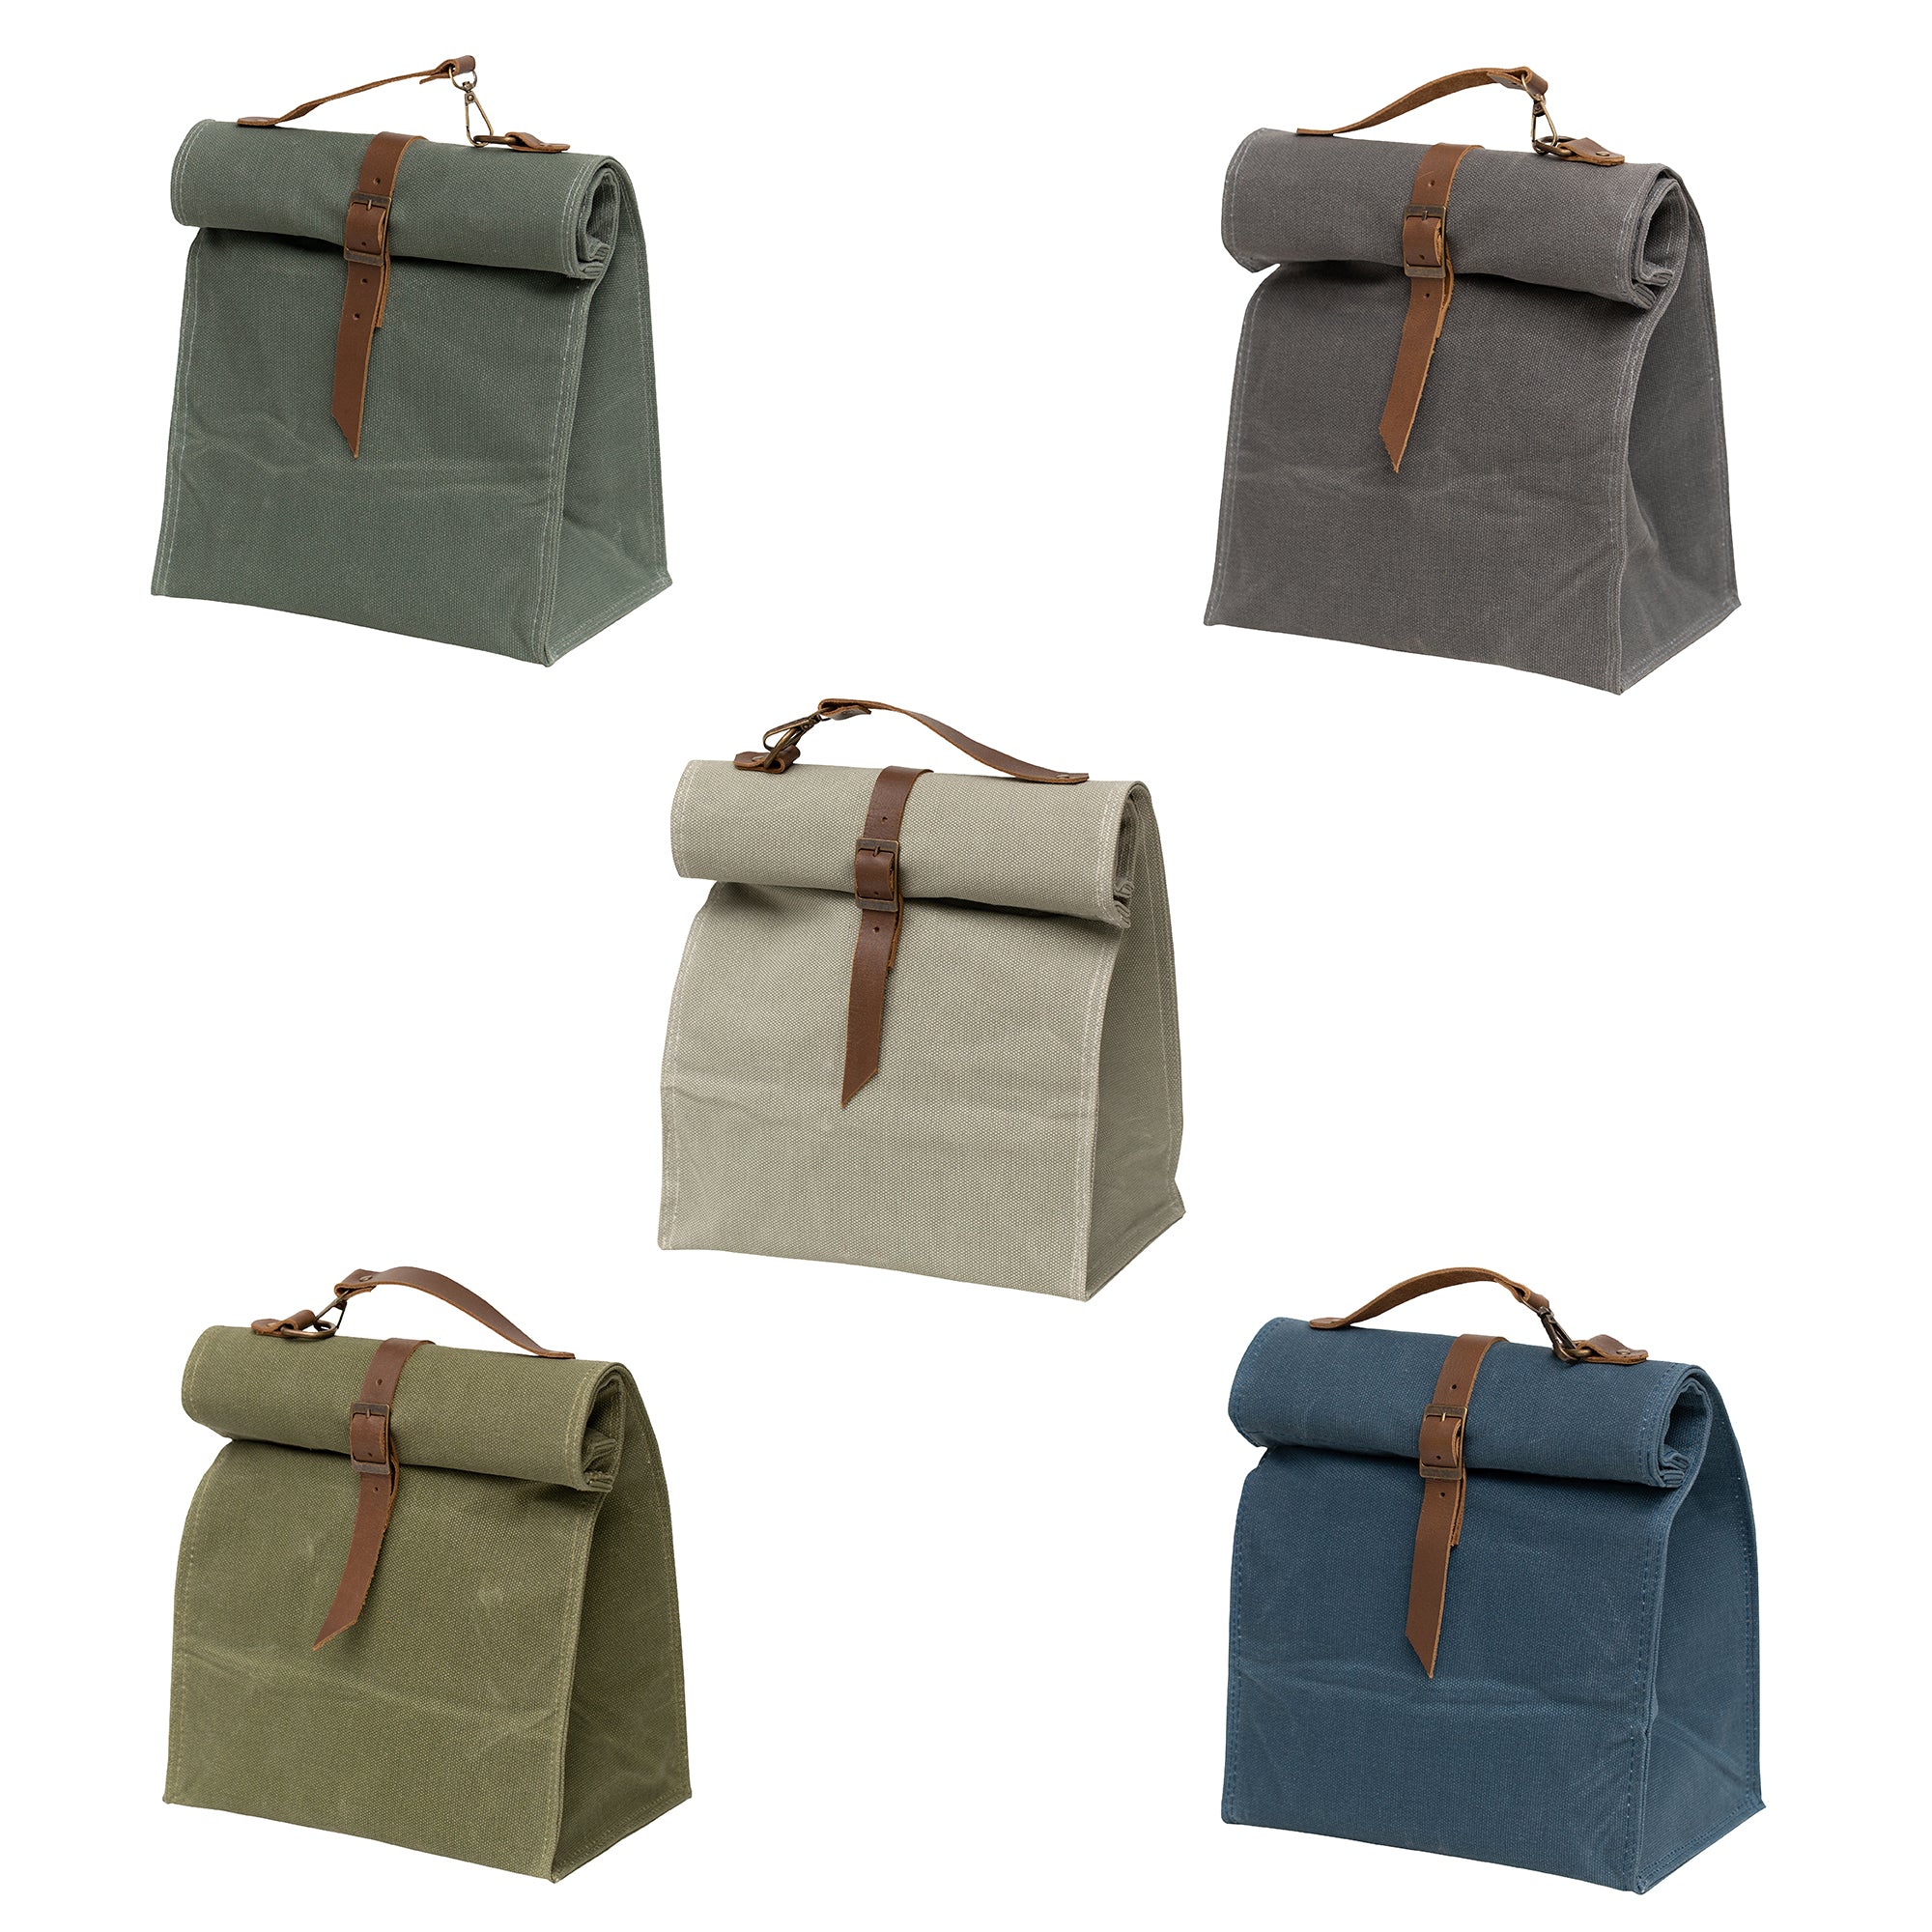  The Original Waxed Canvas Lunch Bag, Handmade with Certified  Organic Cotton and Hand Waxed with Beeswax, Foldable, Stiff Material,  Plastic-Free, Reusable, GOTS, Large, For Men, Women, Kids, Brown: Home &  Kitchen